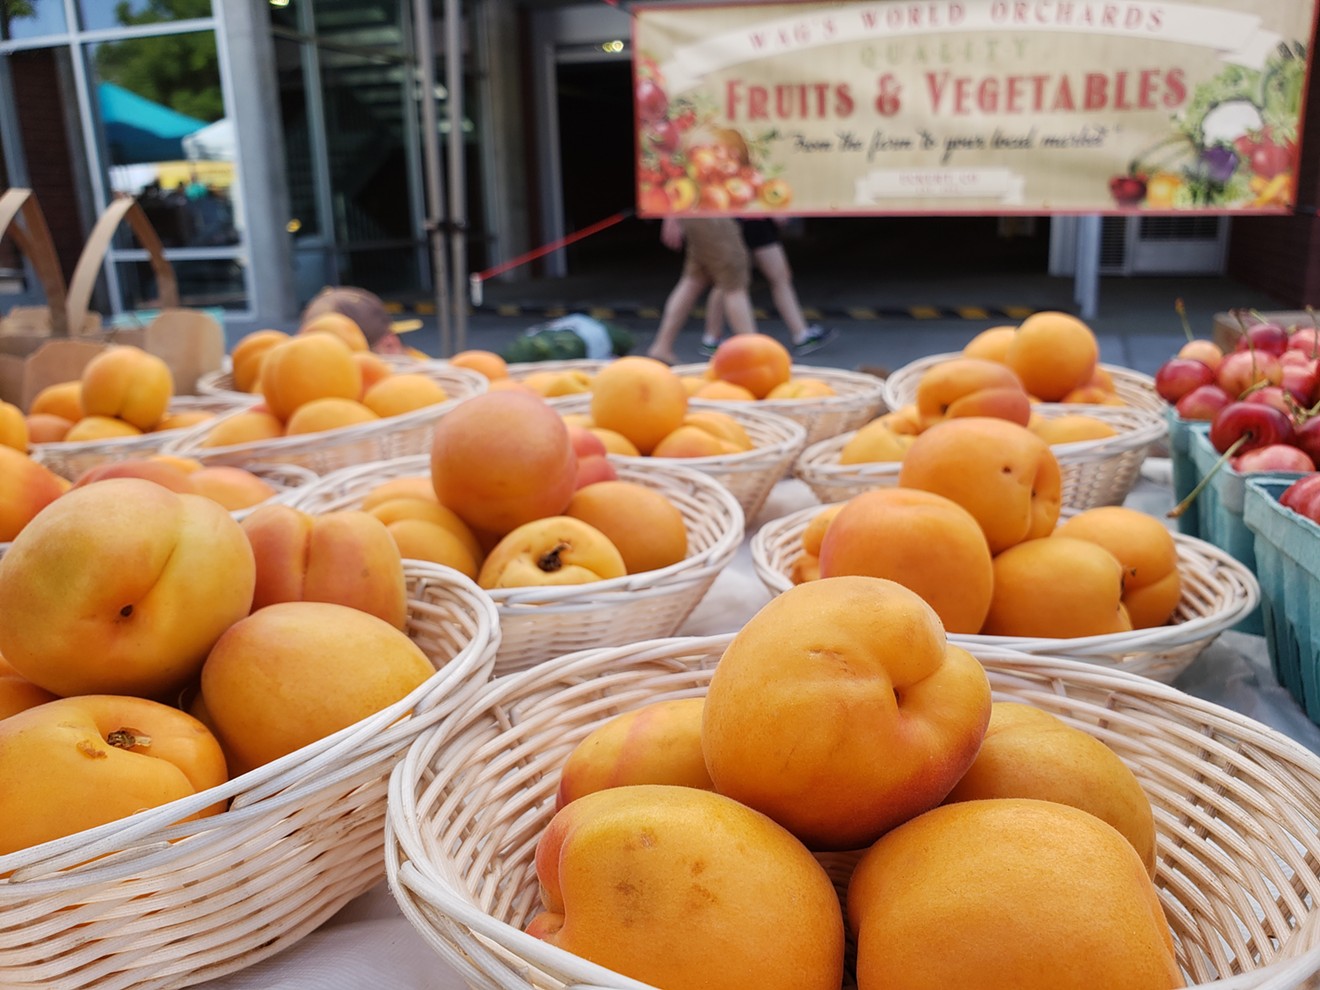 The season for apricots is short, but at the South Pearl Street Farmers' Market, shoppers can find them at Wag's World Orchards.